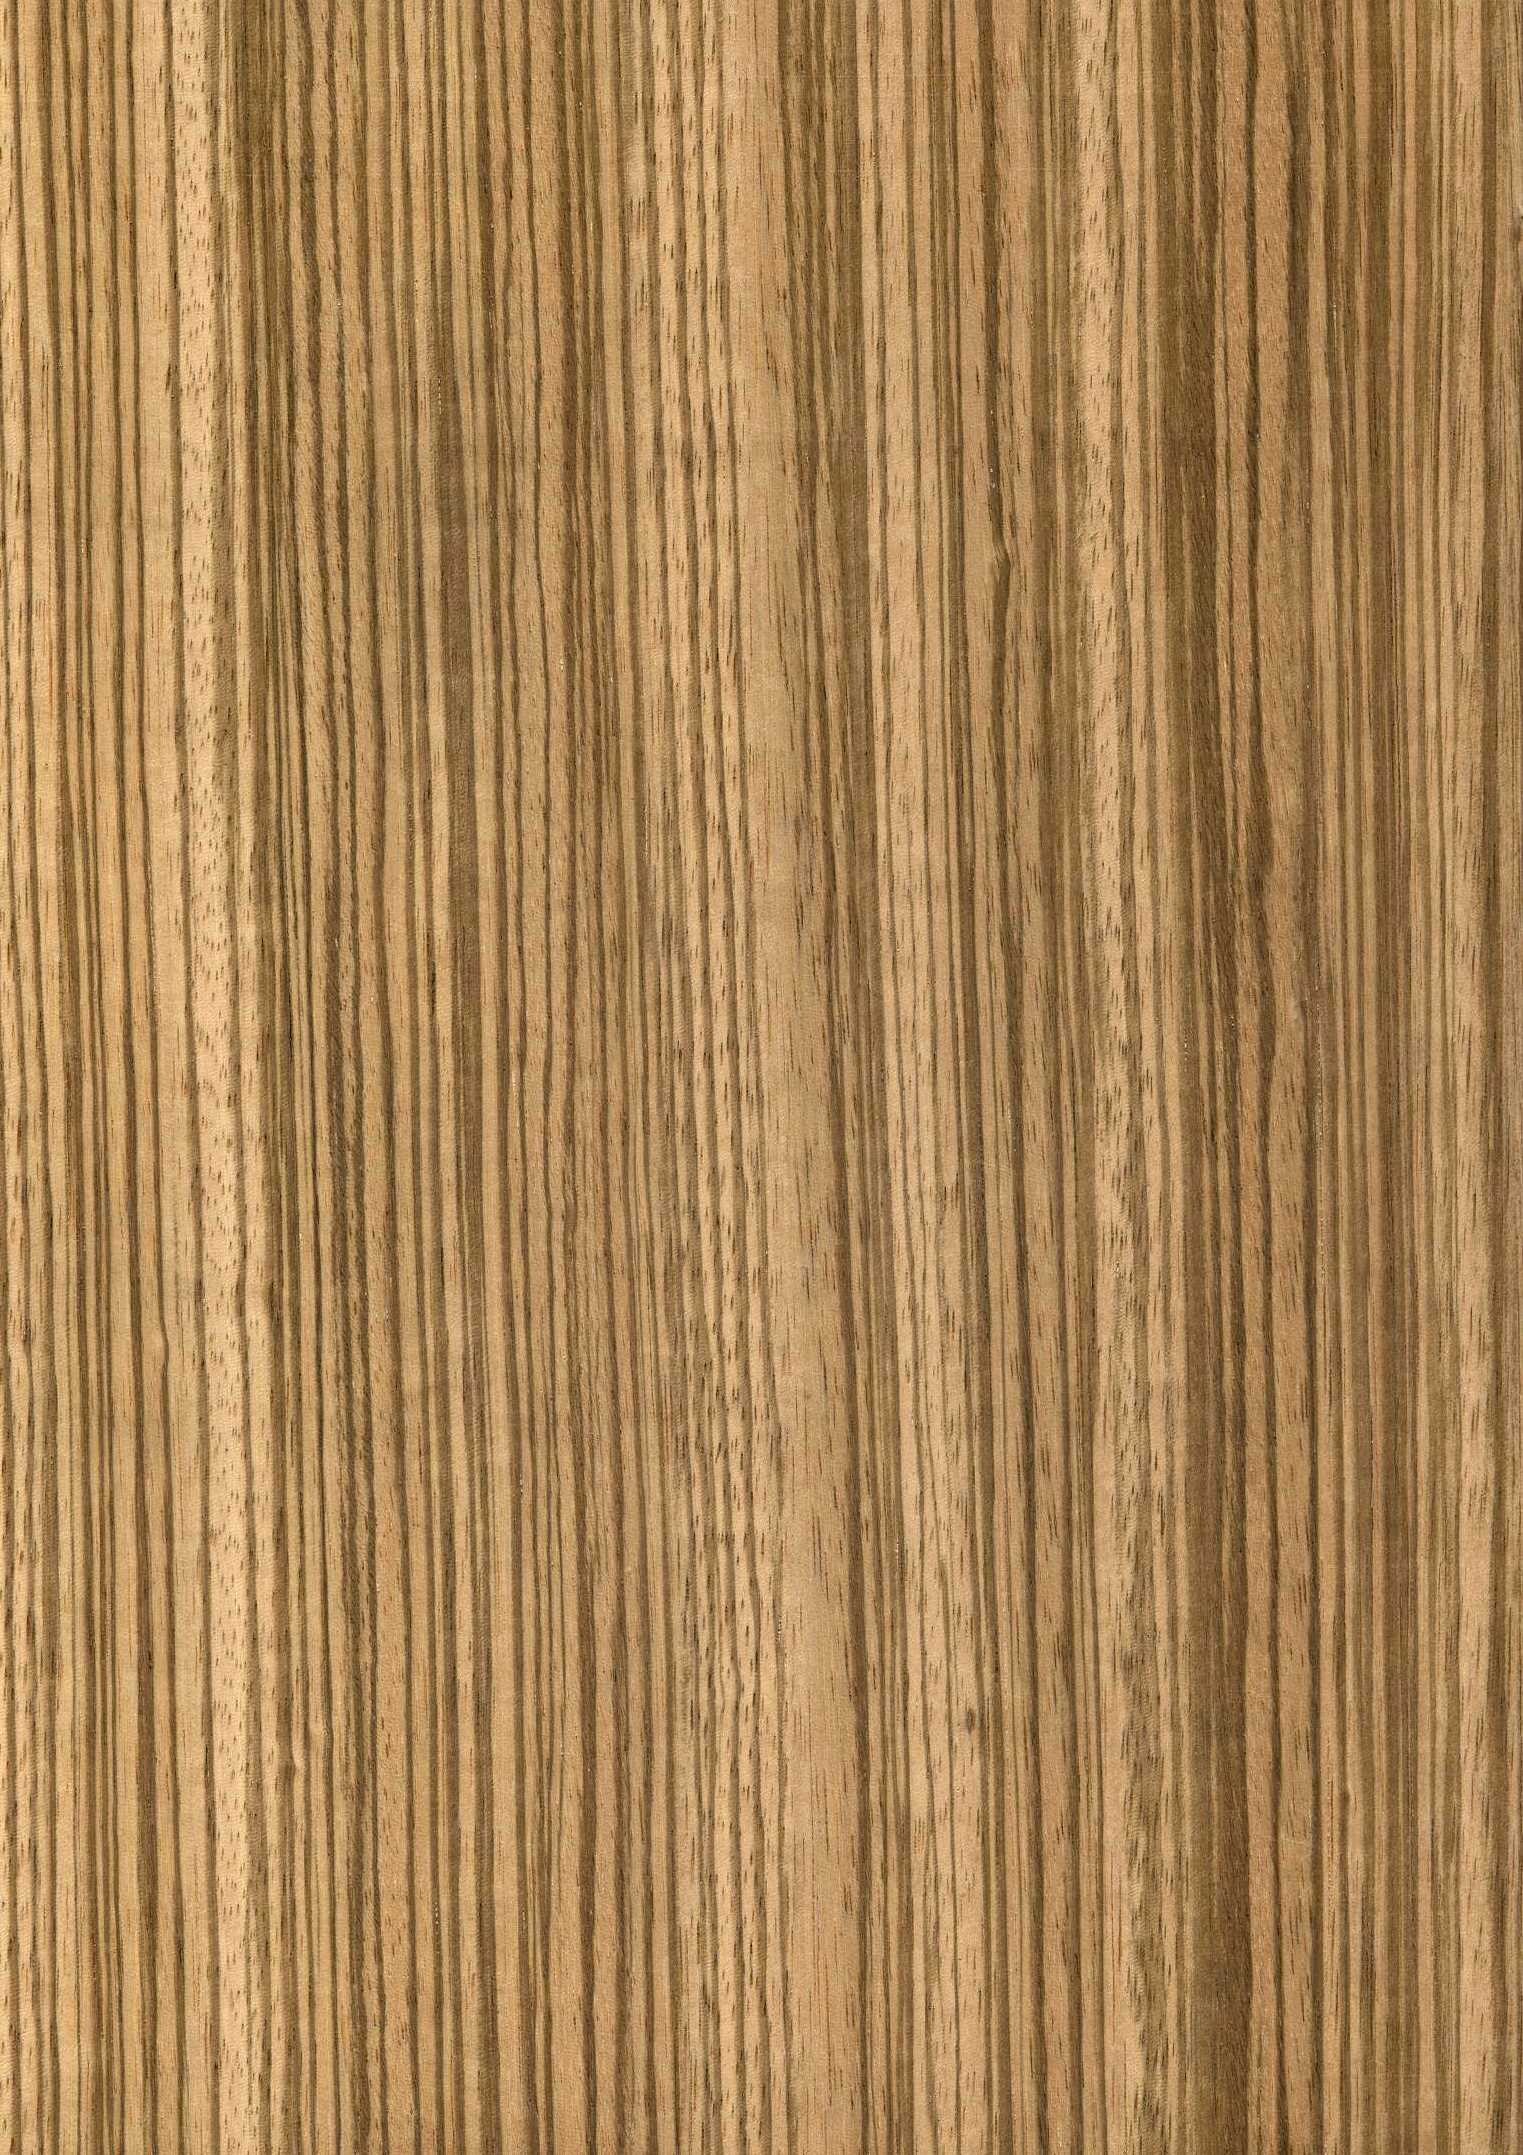 Barn Wood background ·① Download free awesome backgrounds ...